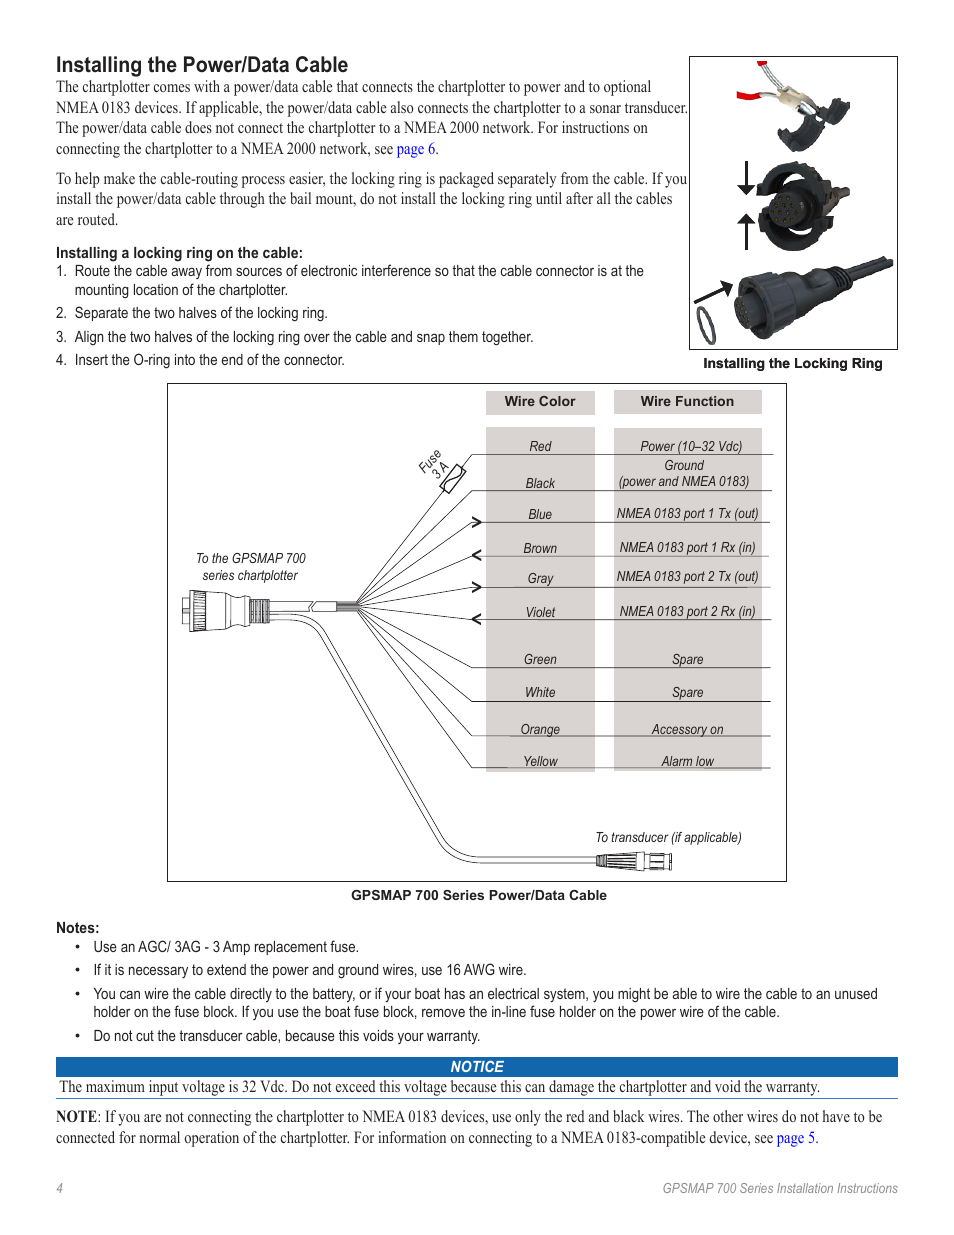 Installing the power/data cable | Garmin GPSMAP 740s User Manual | Page 4 /  10 | Original mode